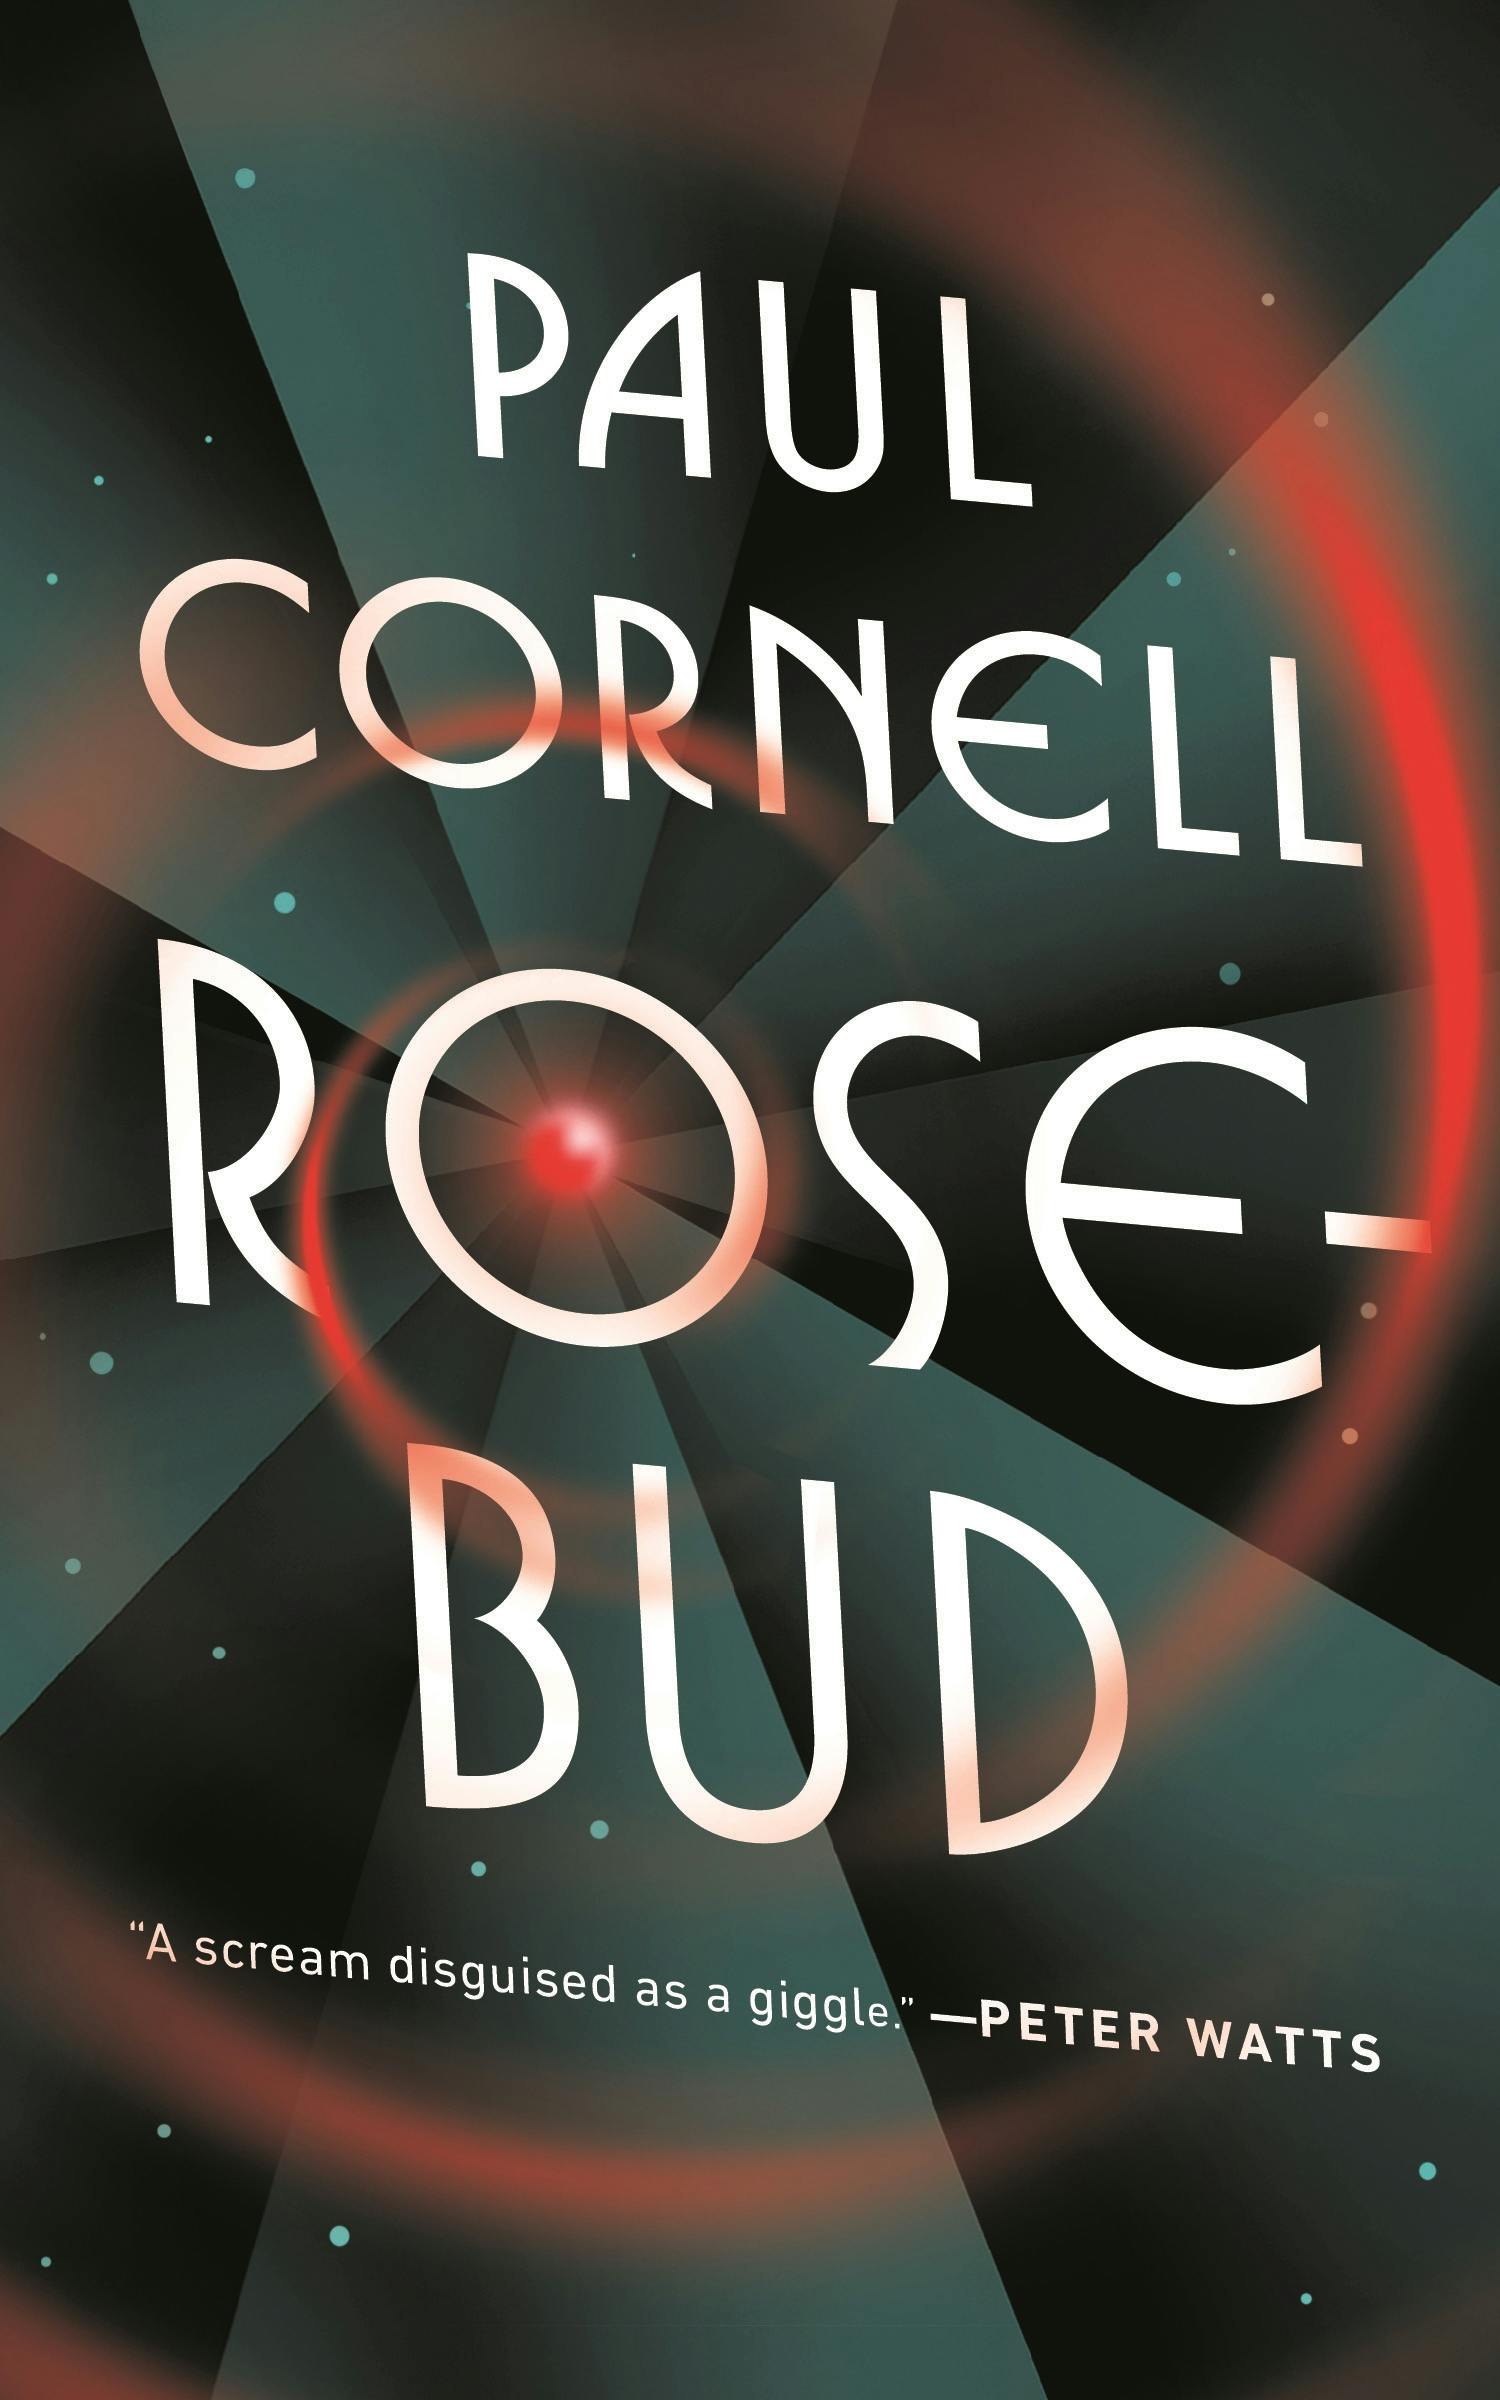 Cover for the book titled as: Rosebud